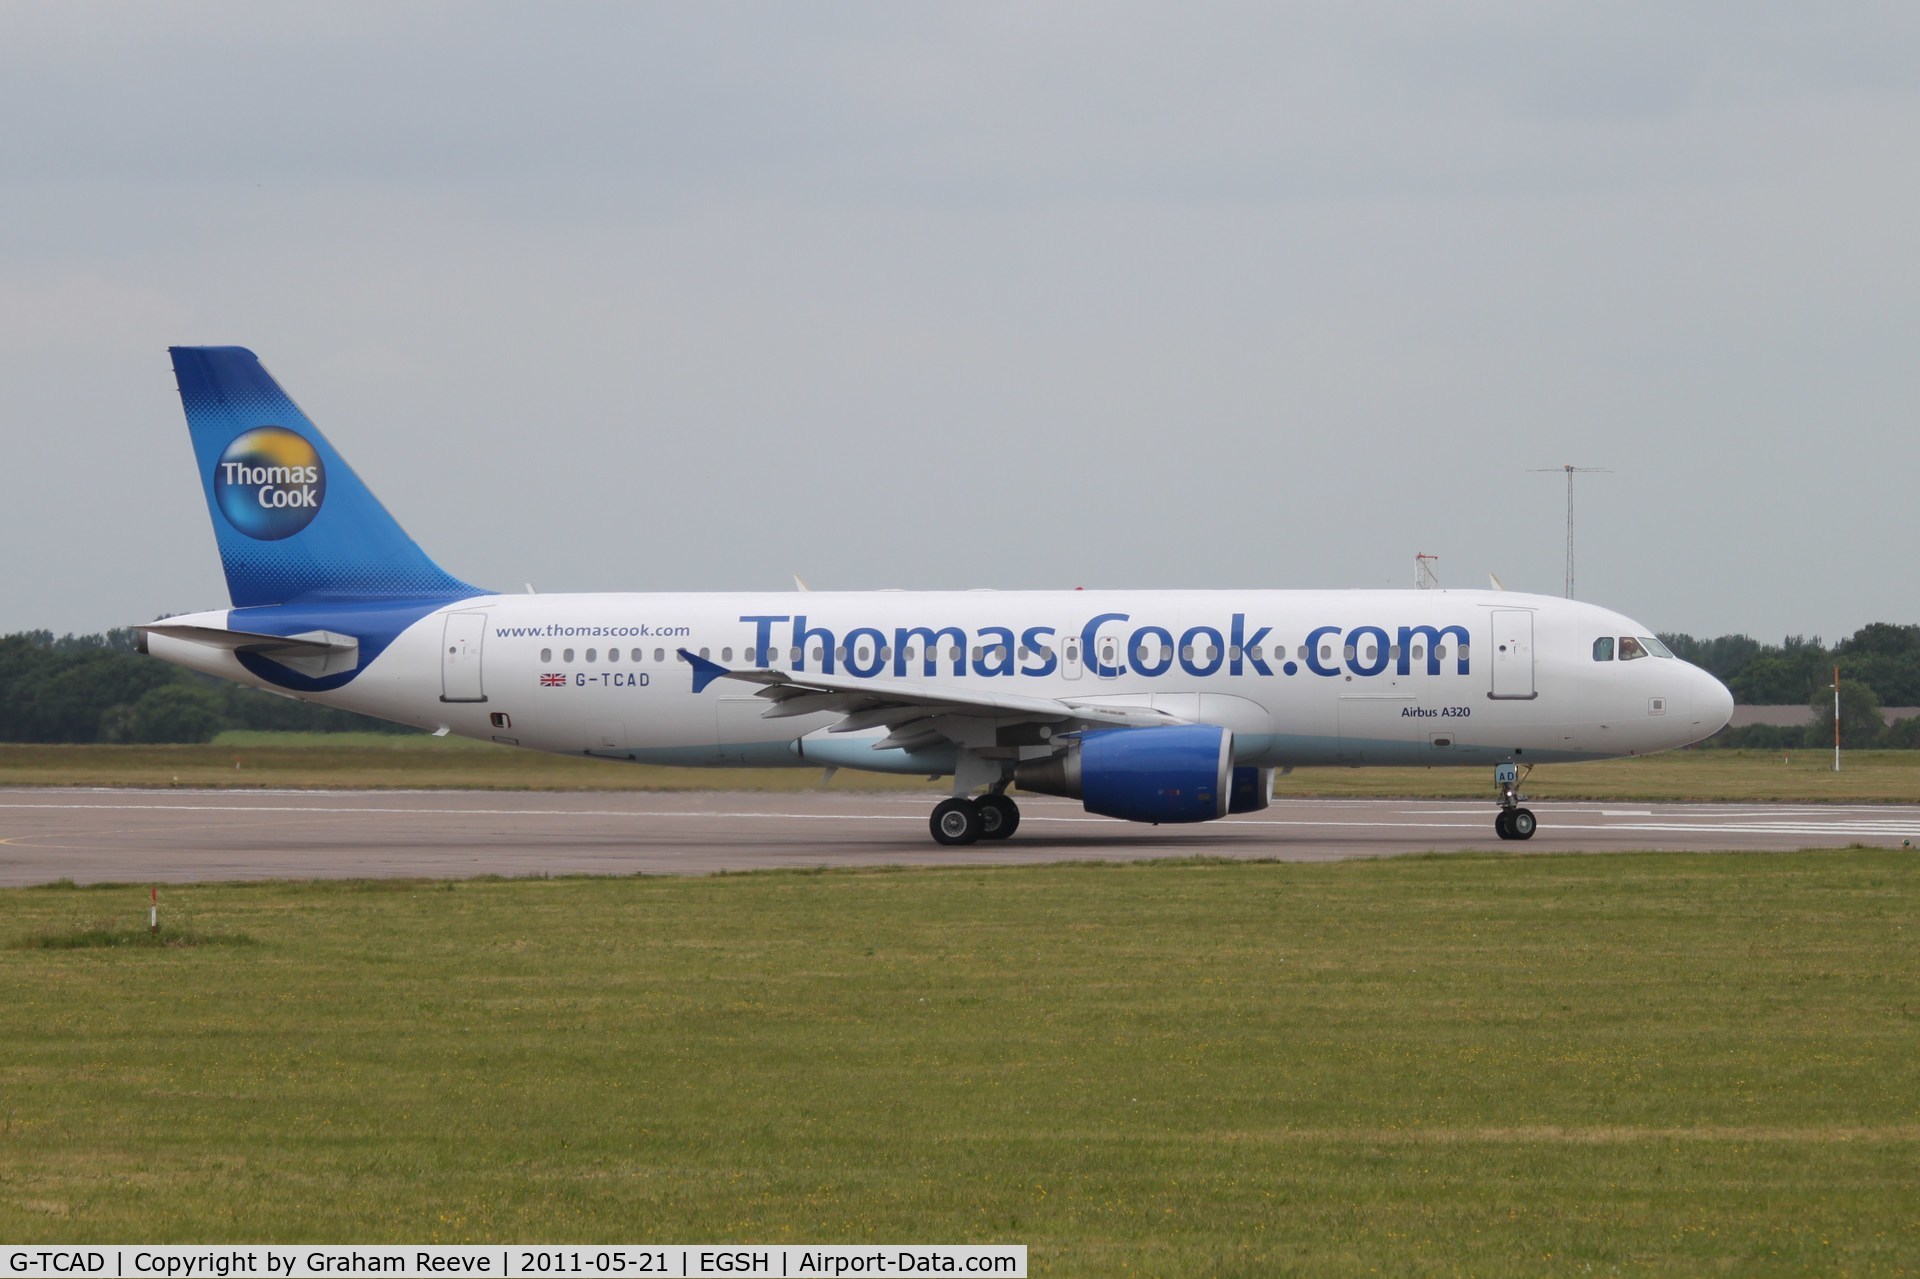 G-TCAD, 2003 Airbus A320-214 C/N 2114, About to depart.